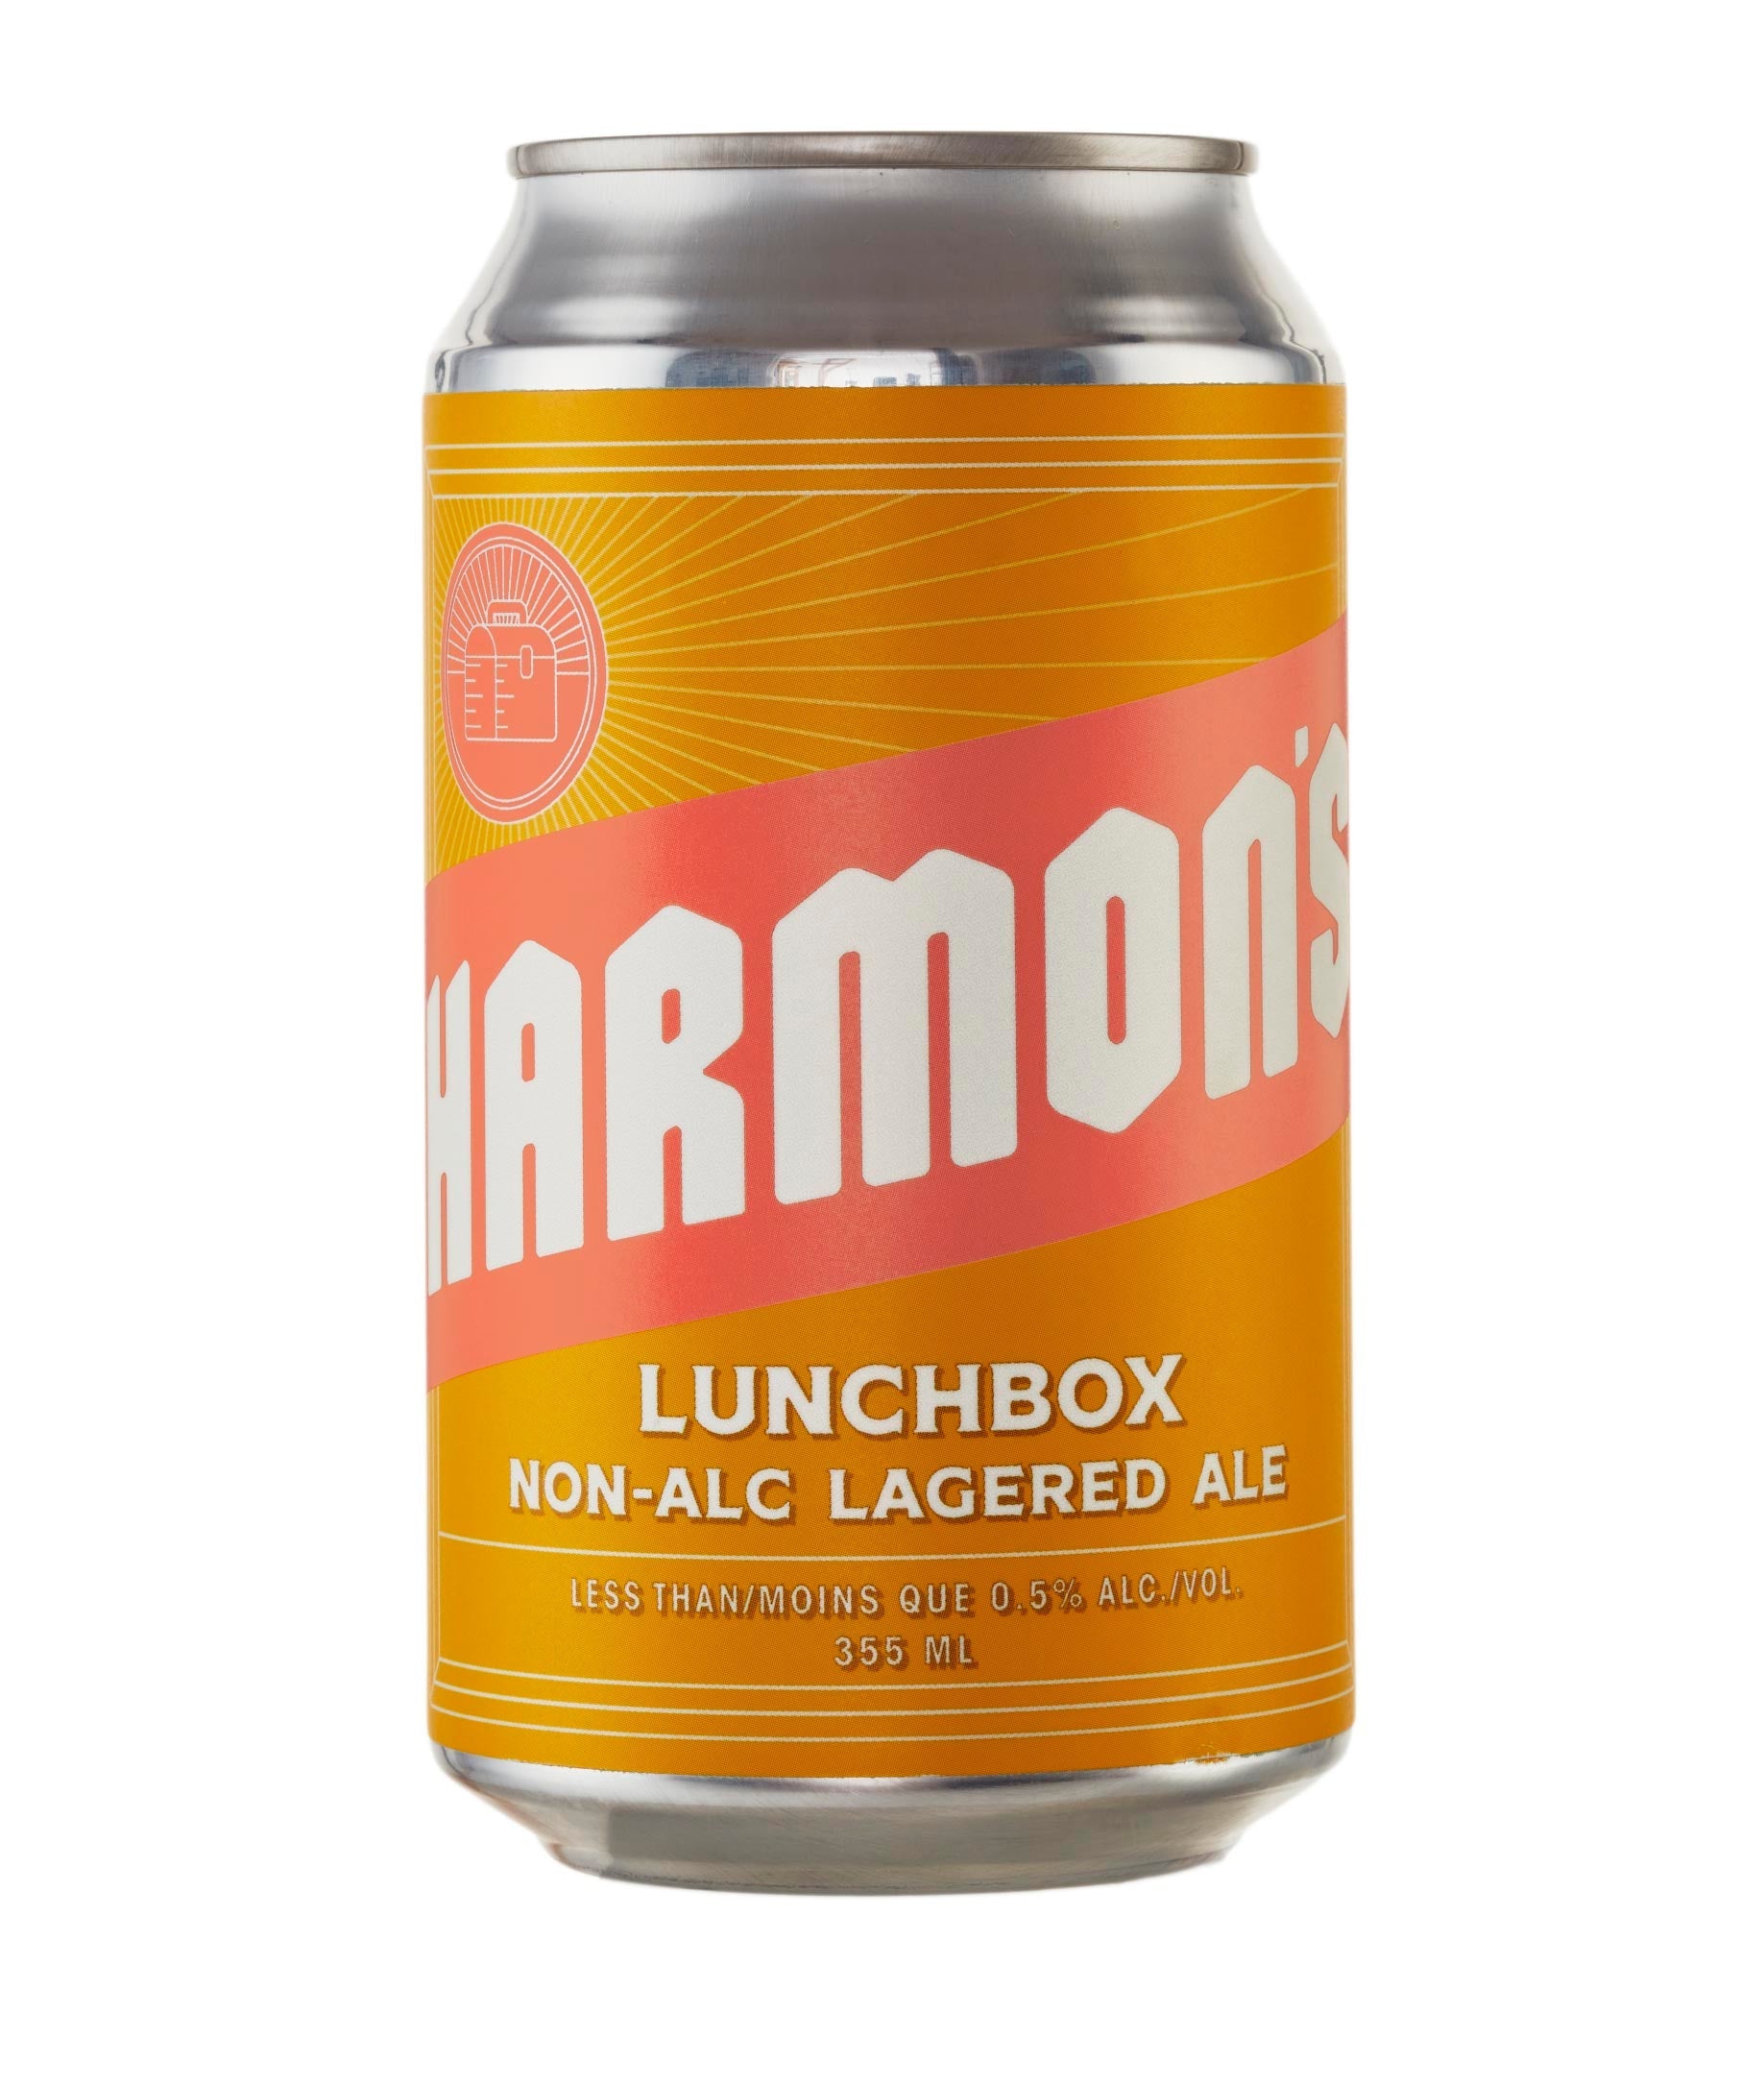 Lunchbox Non-Alcoholic Lagered Ale